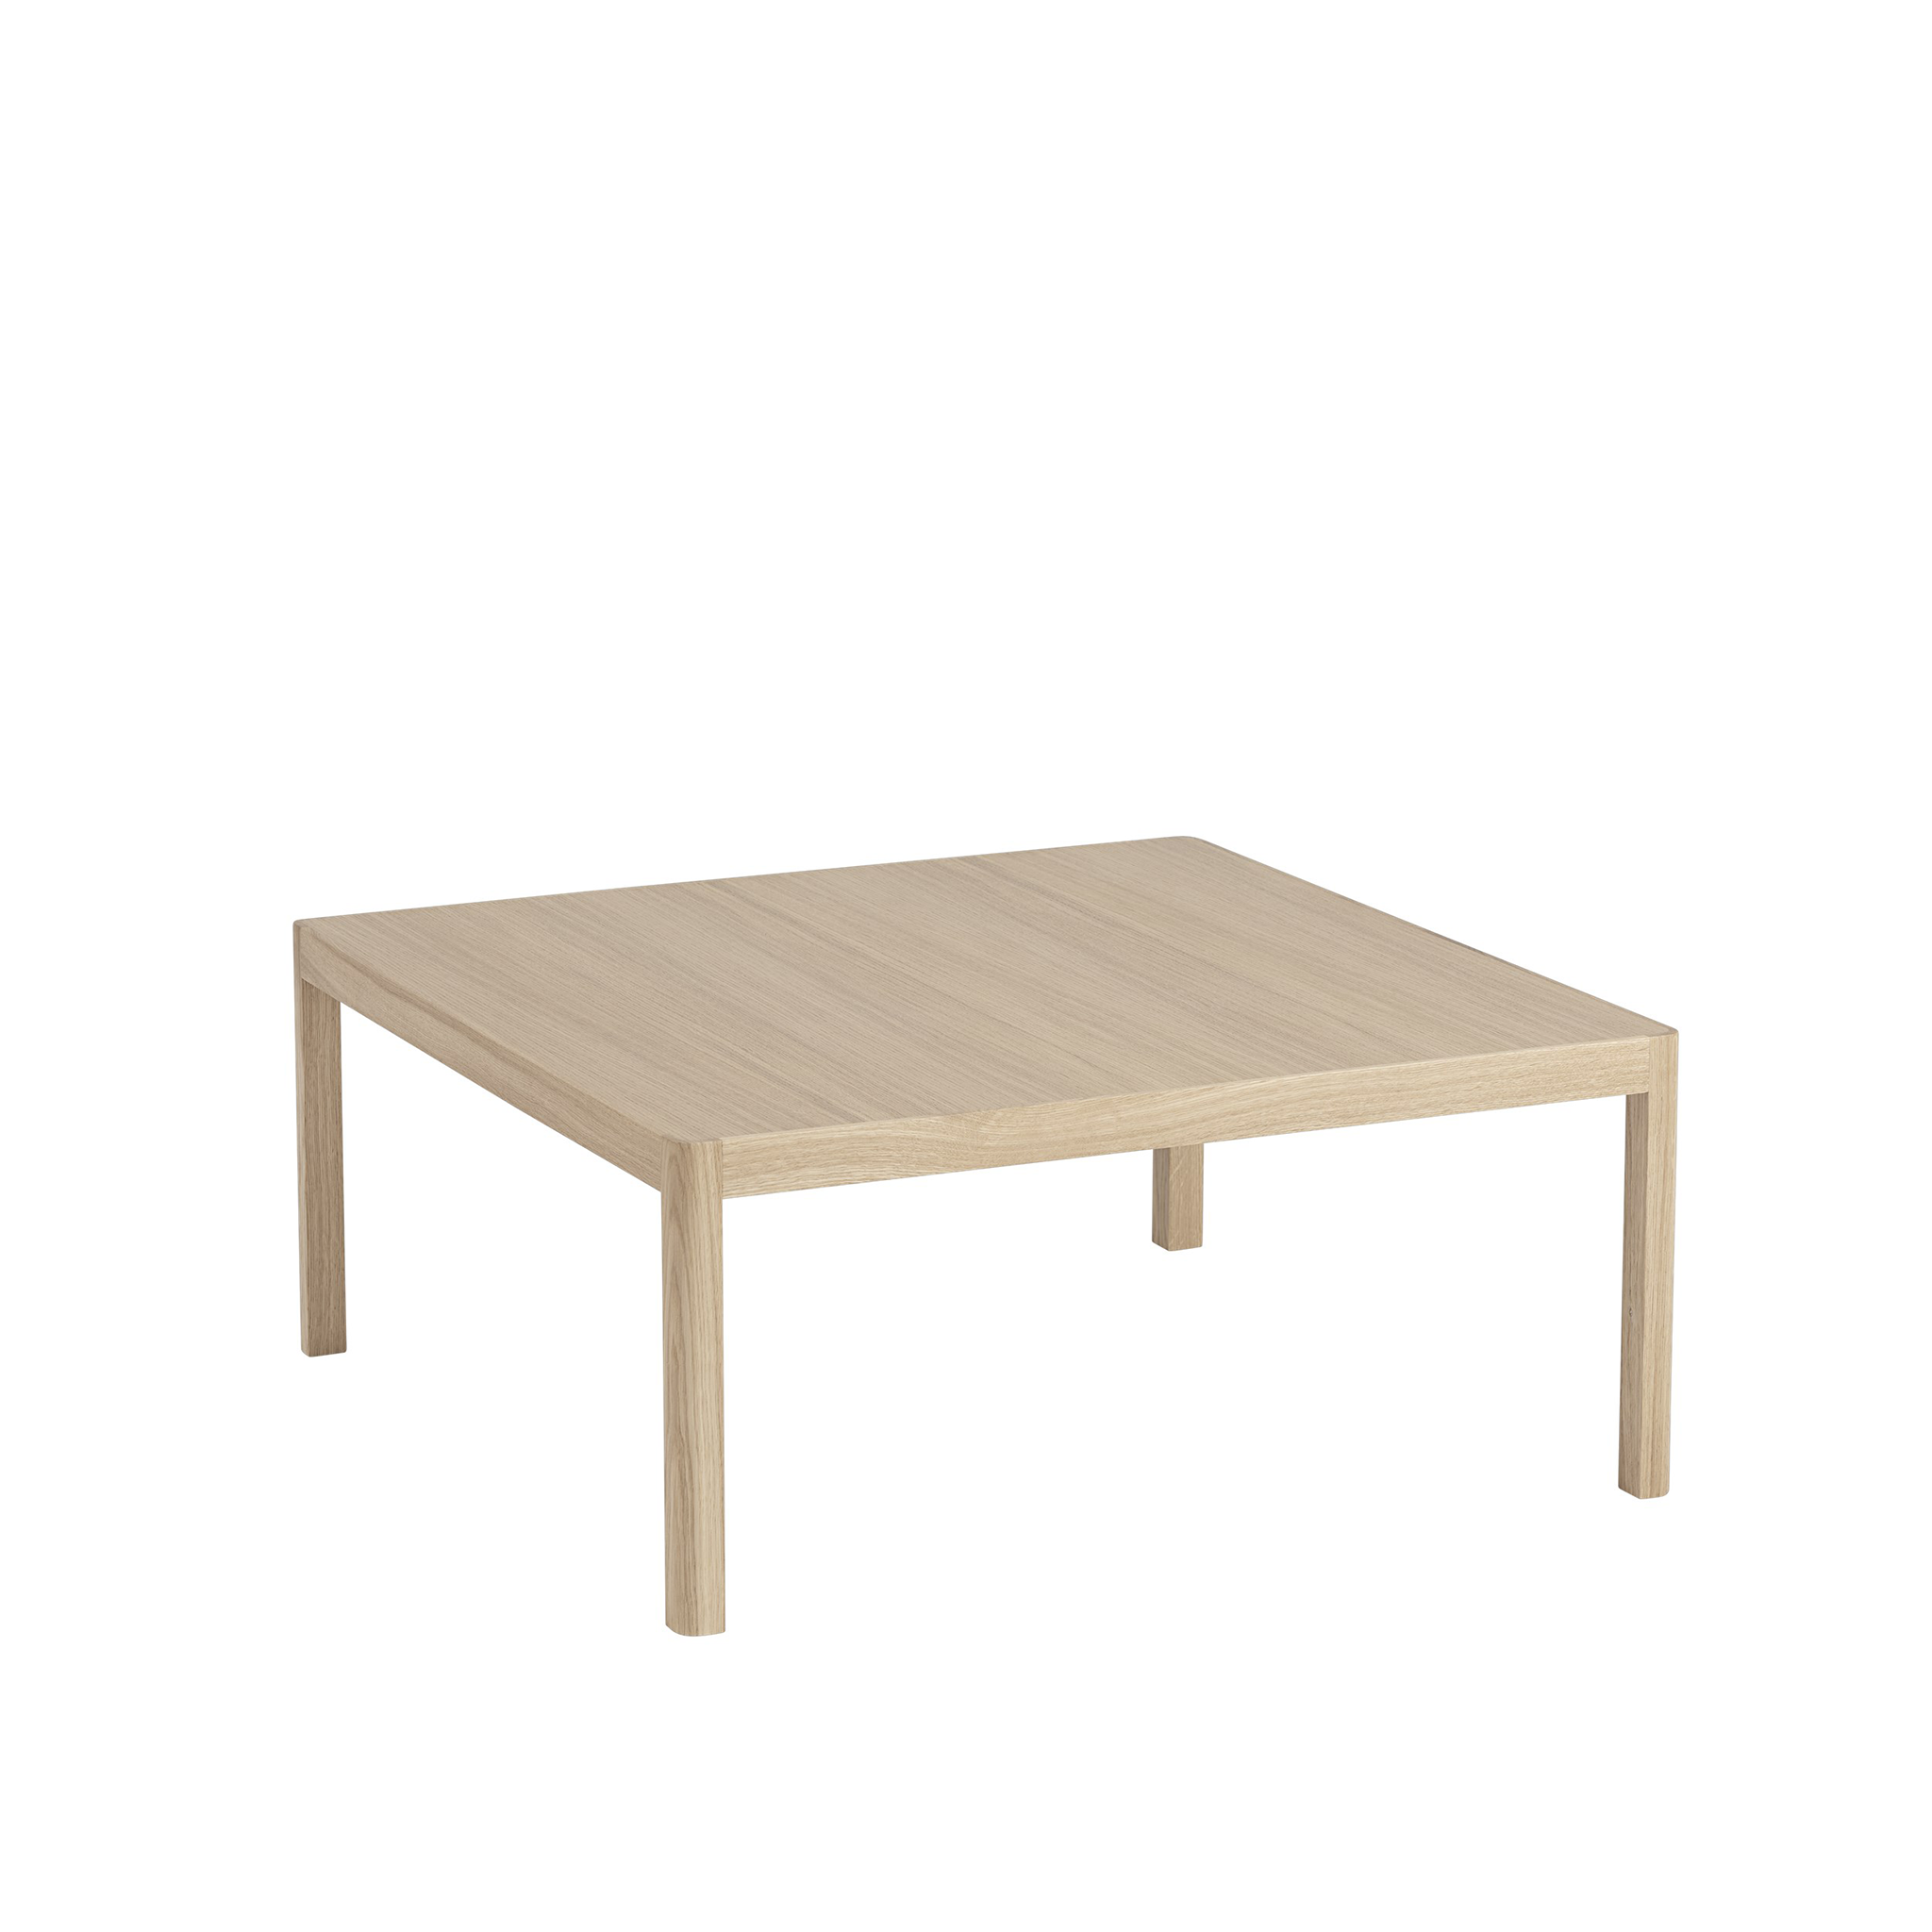 Workshop Coffee Table - Square by Muuto